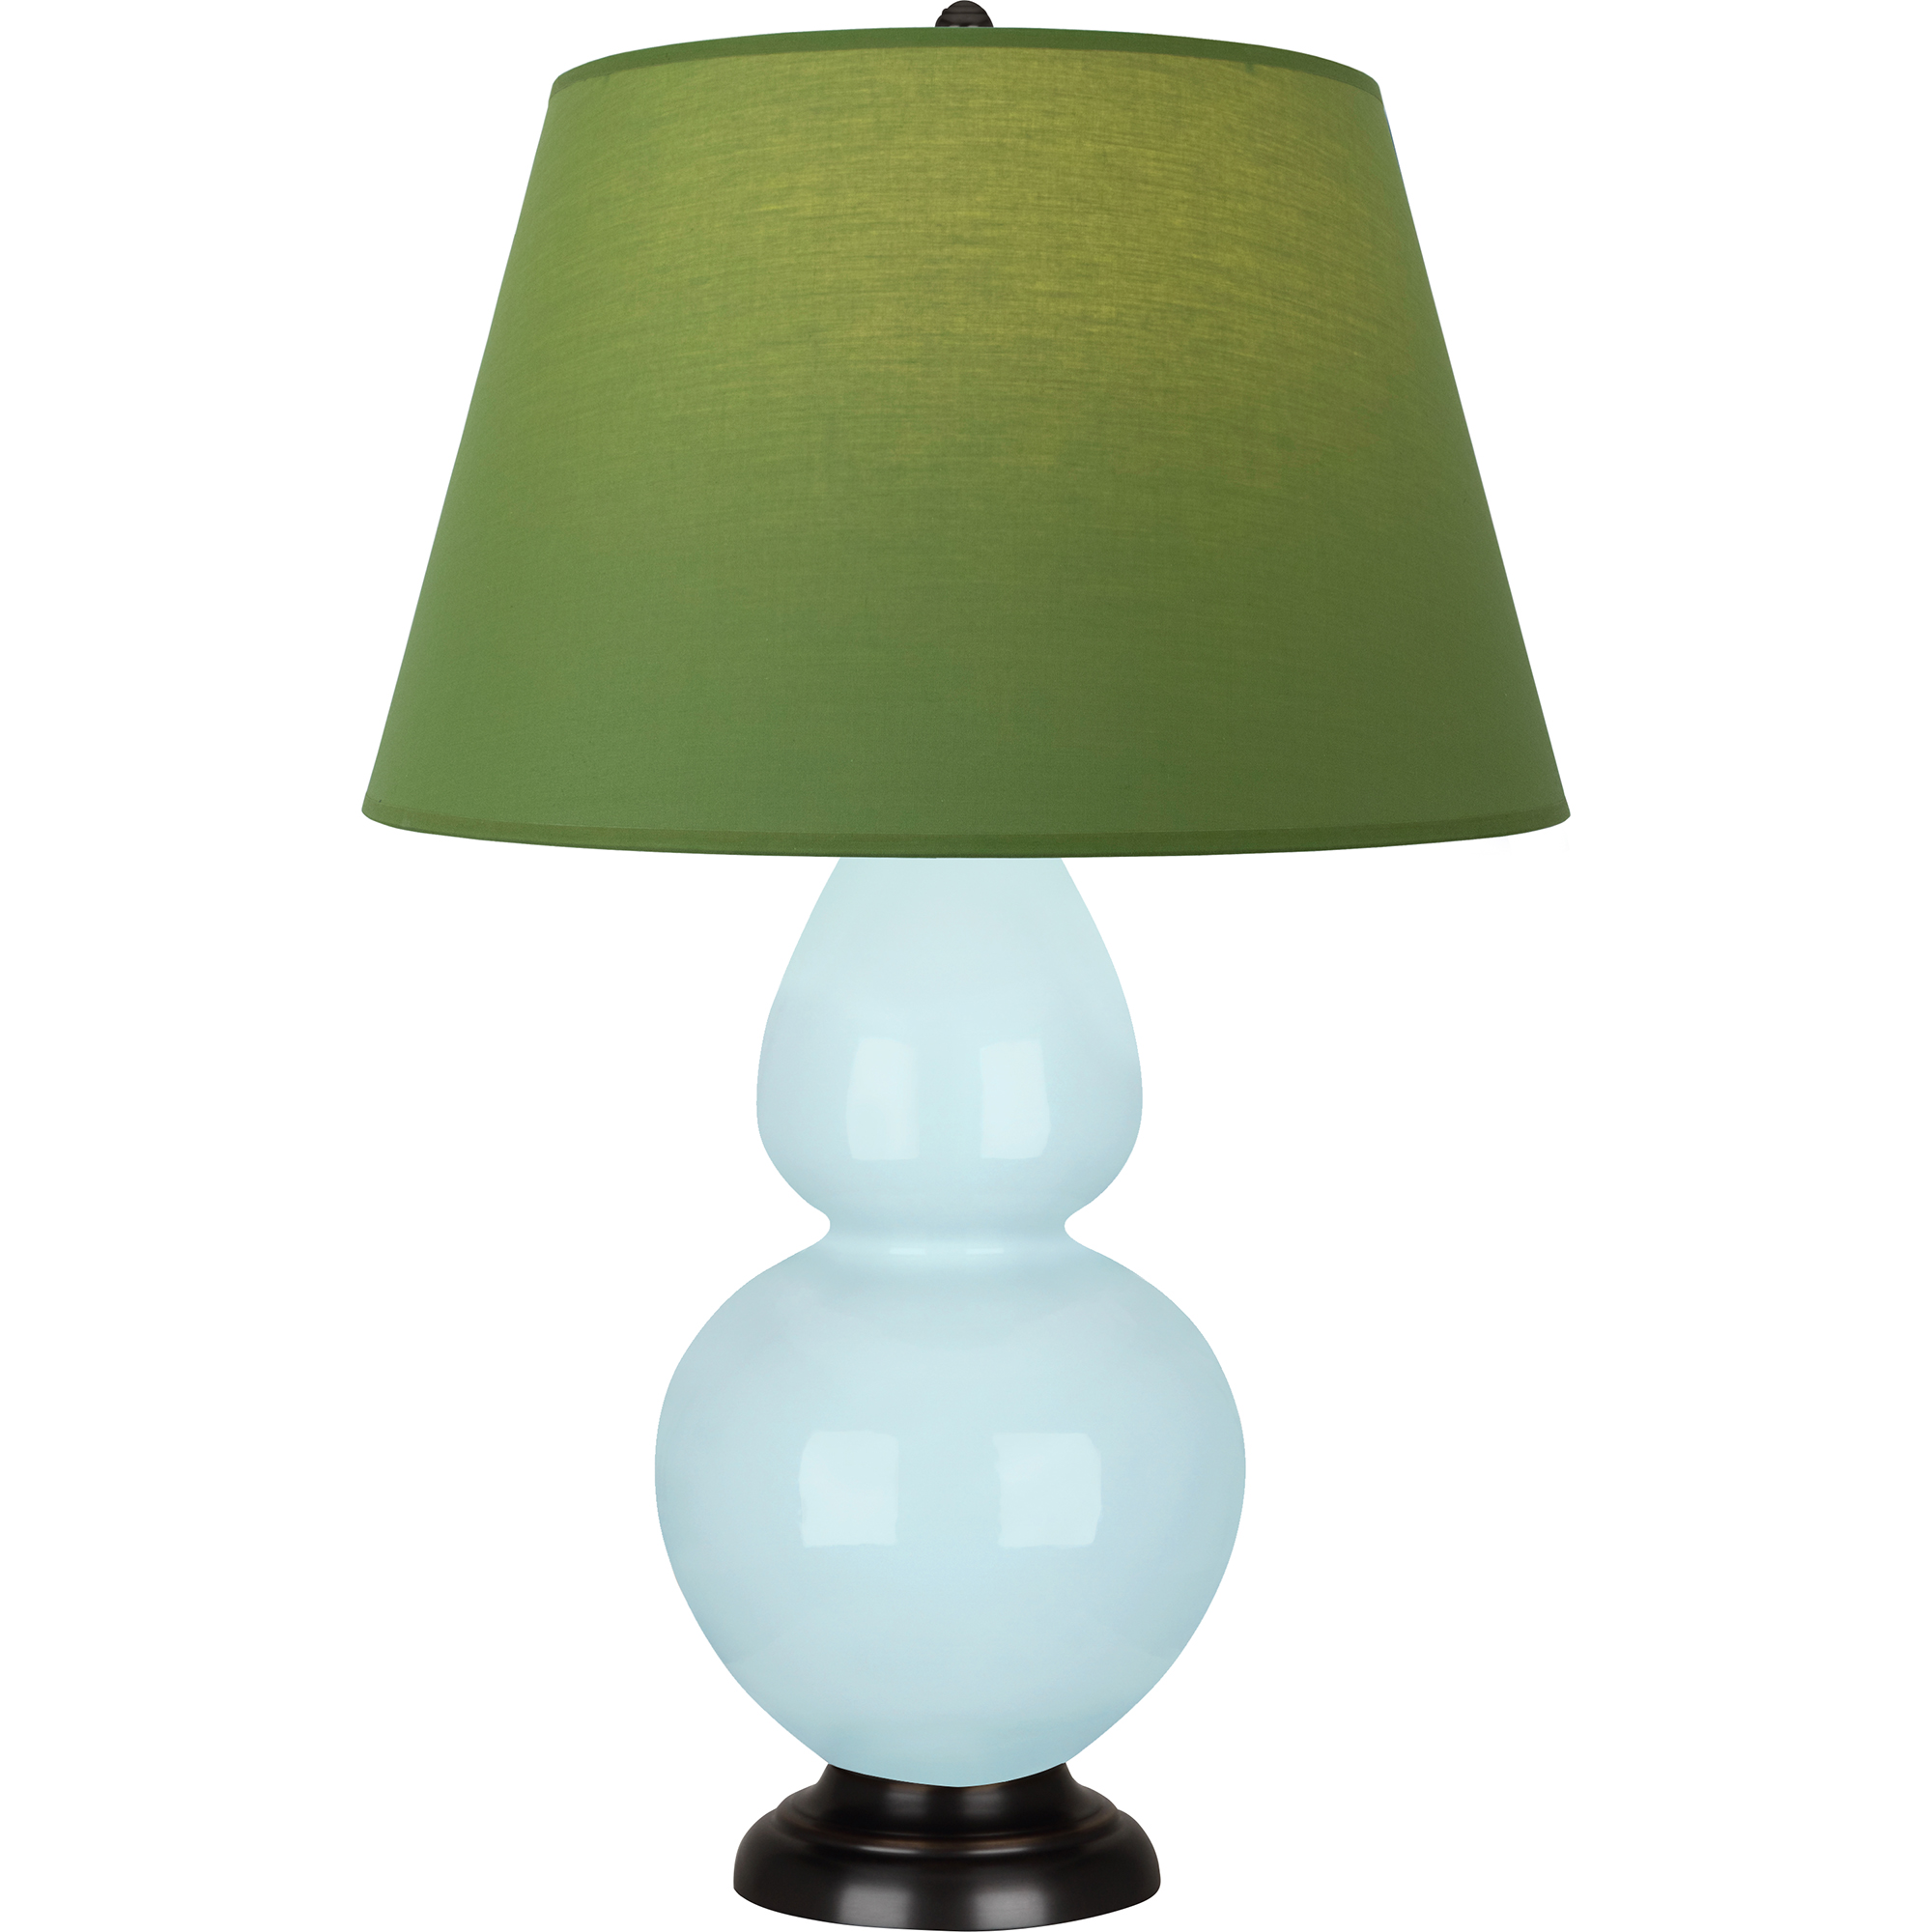 Double Gourd Table Lamp Style #1646G